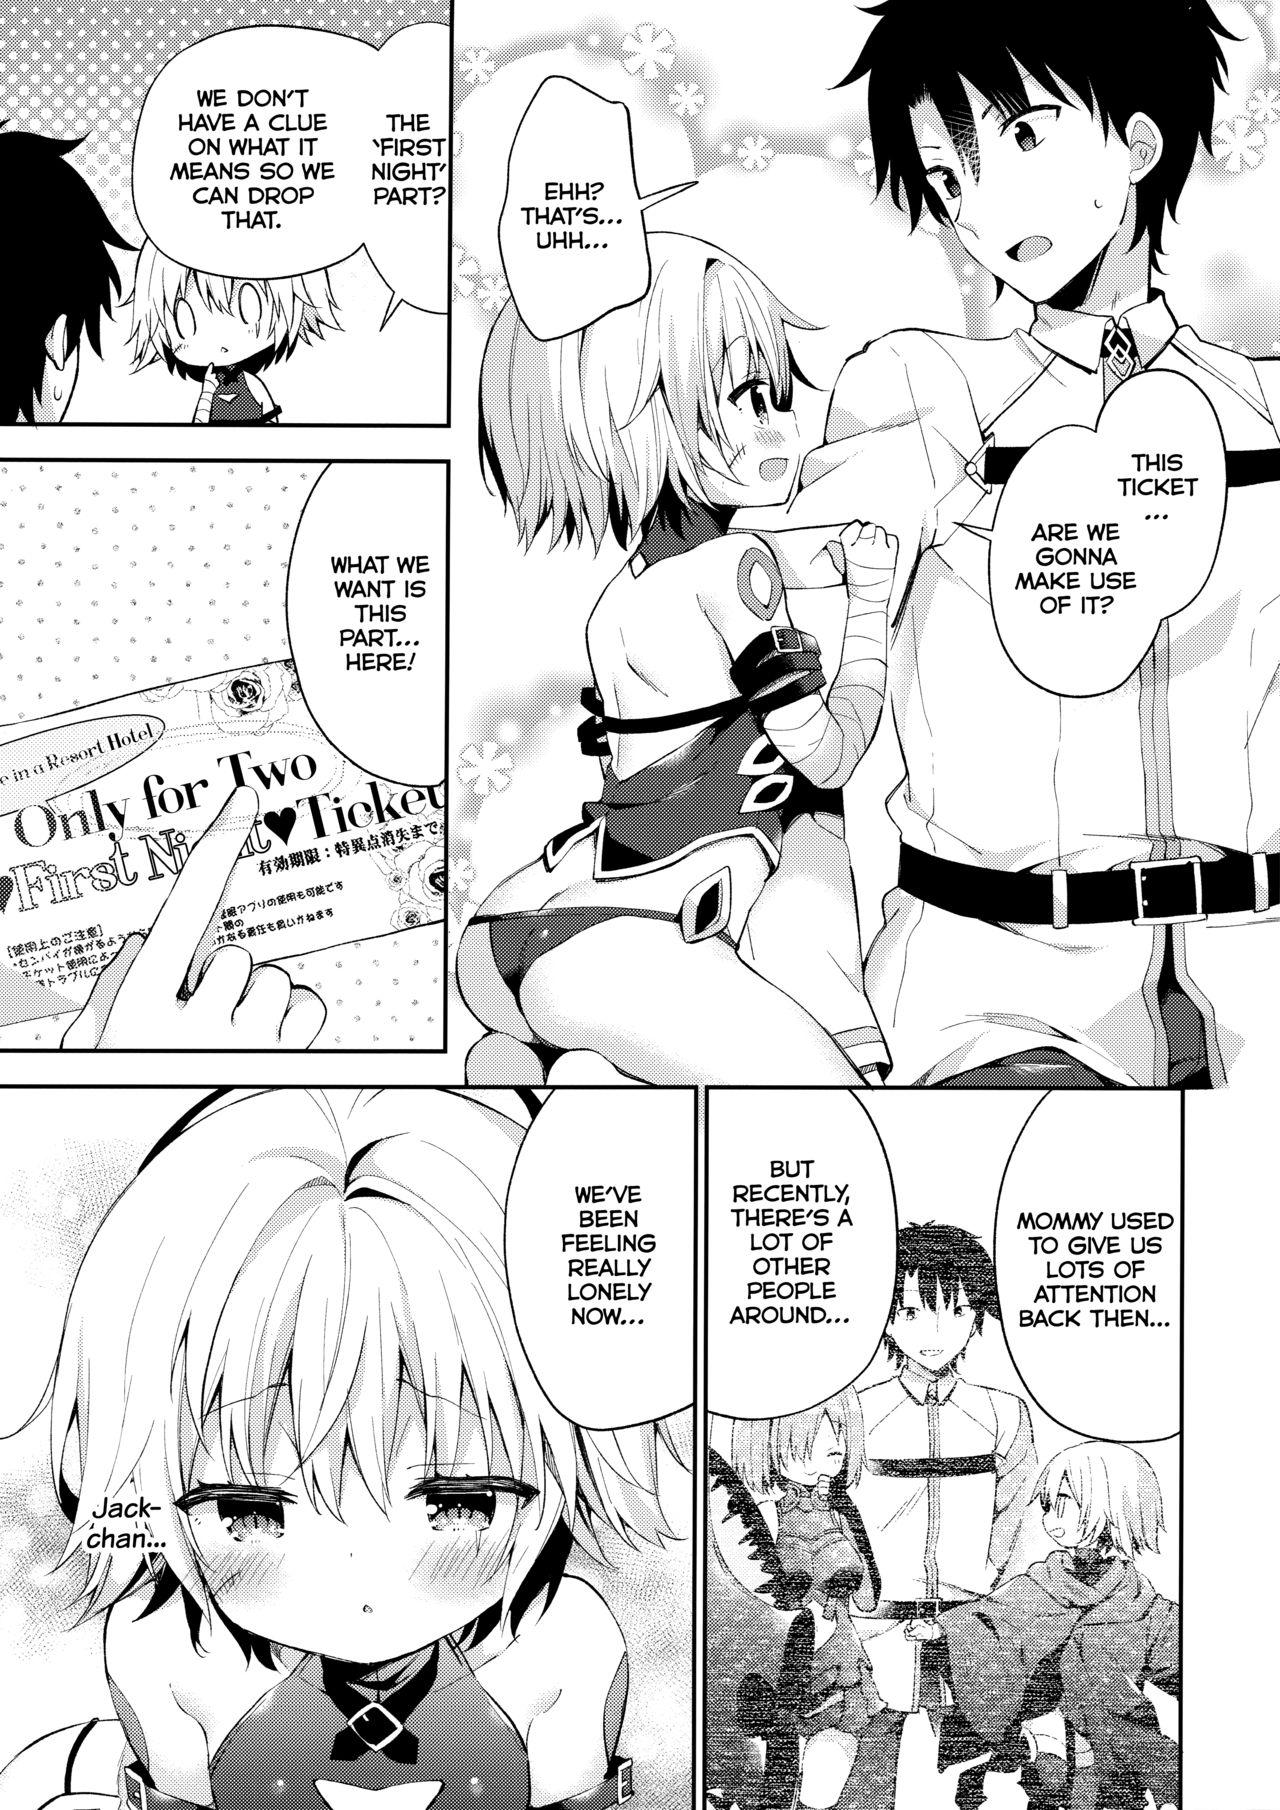 Movie Jack in The Box - Fate grand order Eurobabe - Page 7